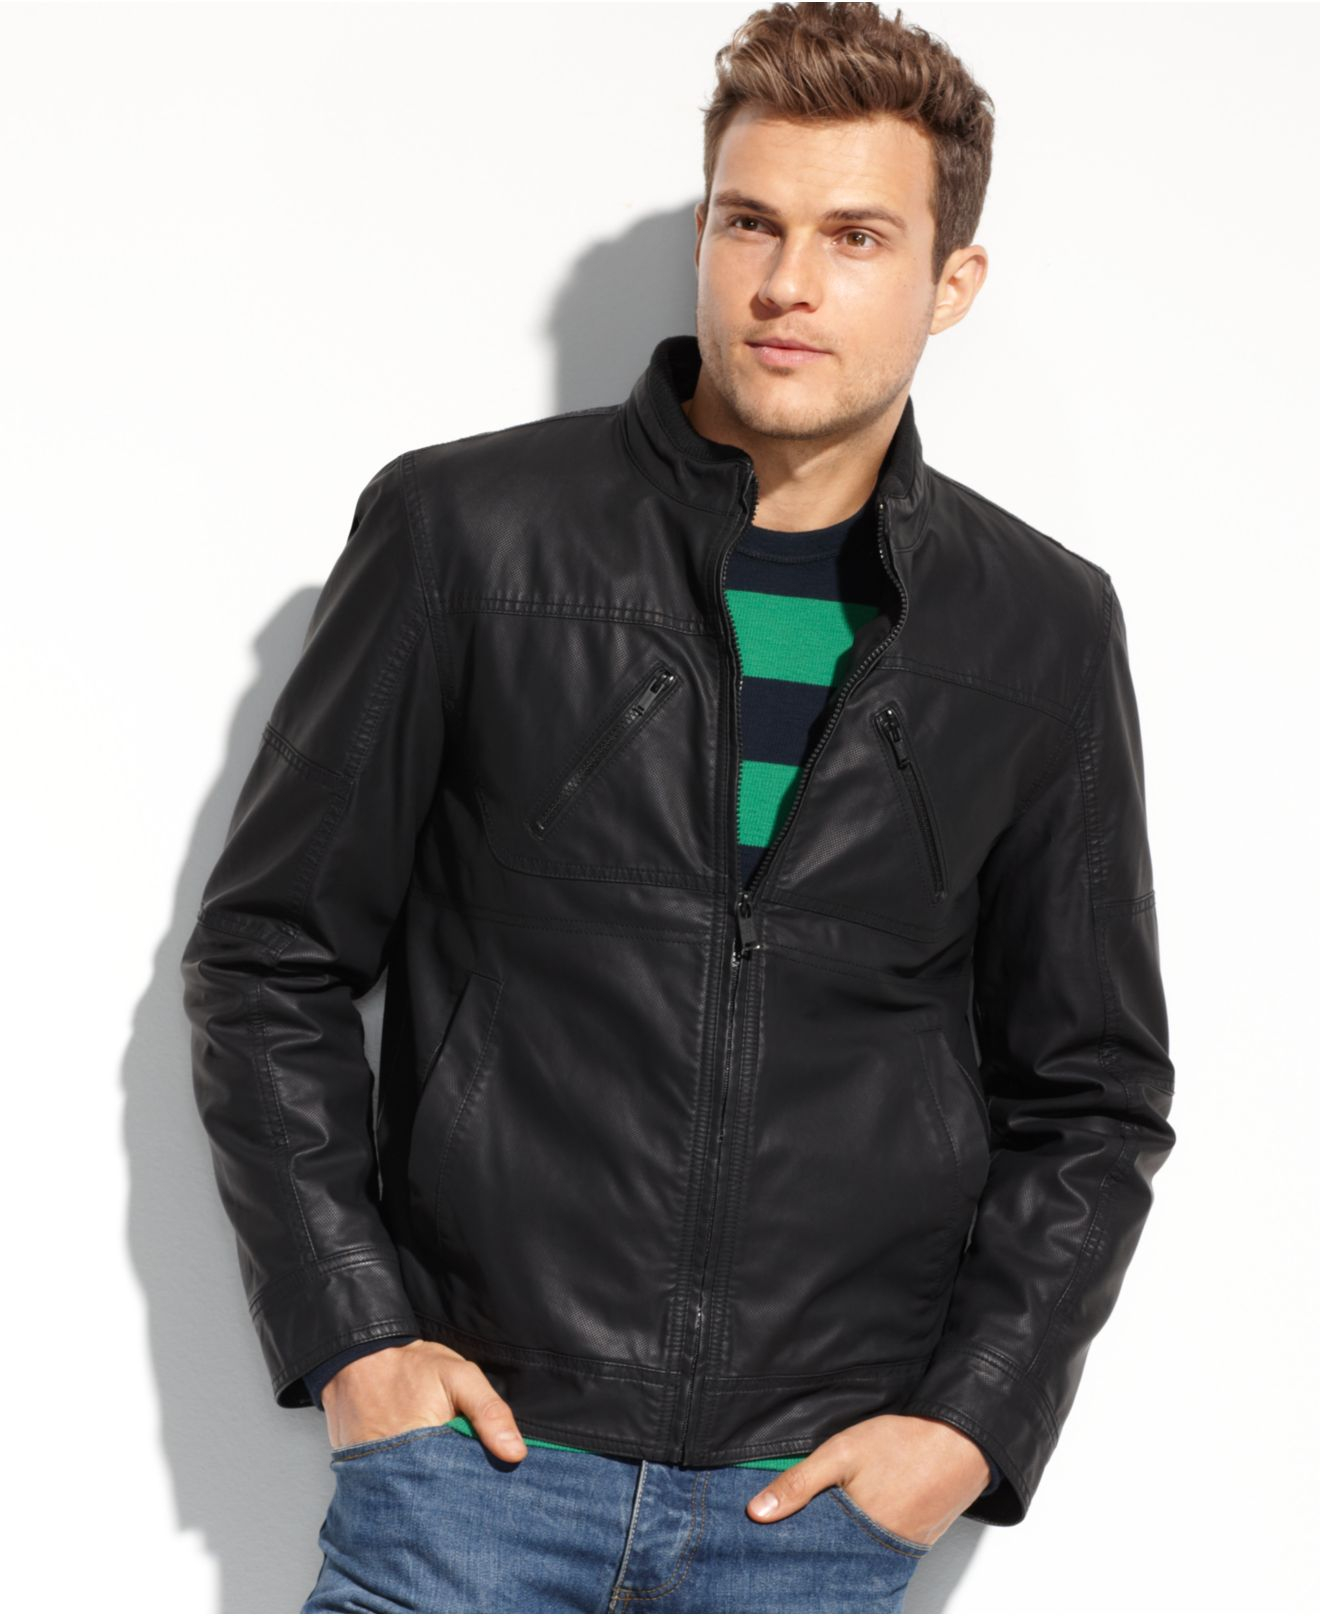 Guess Coats, Lightweight Faux Leather Moto Jacket in Black for Men - Lyst